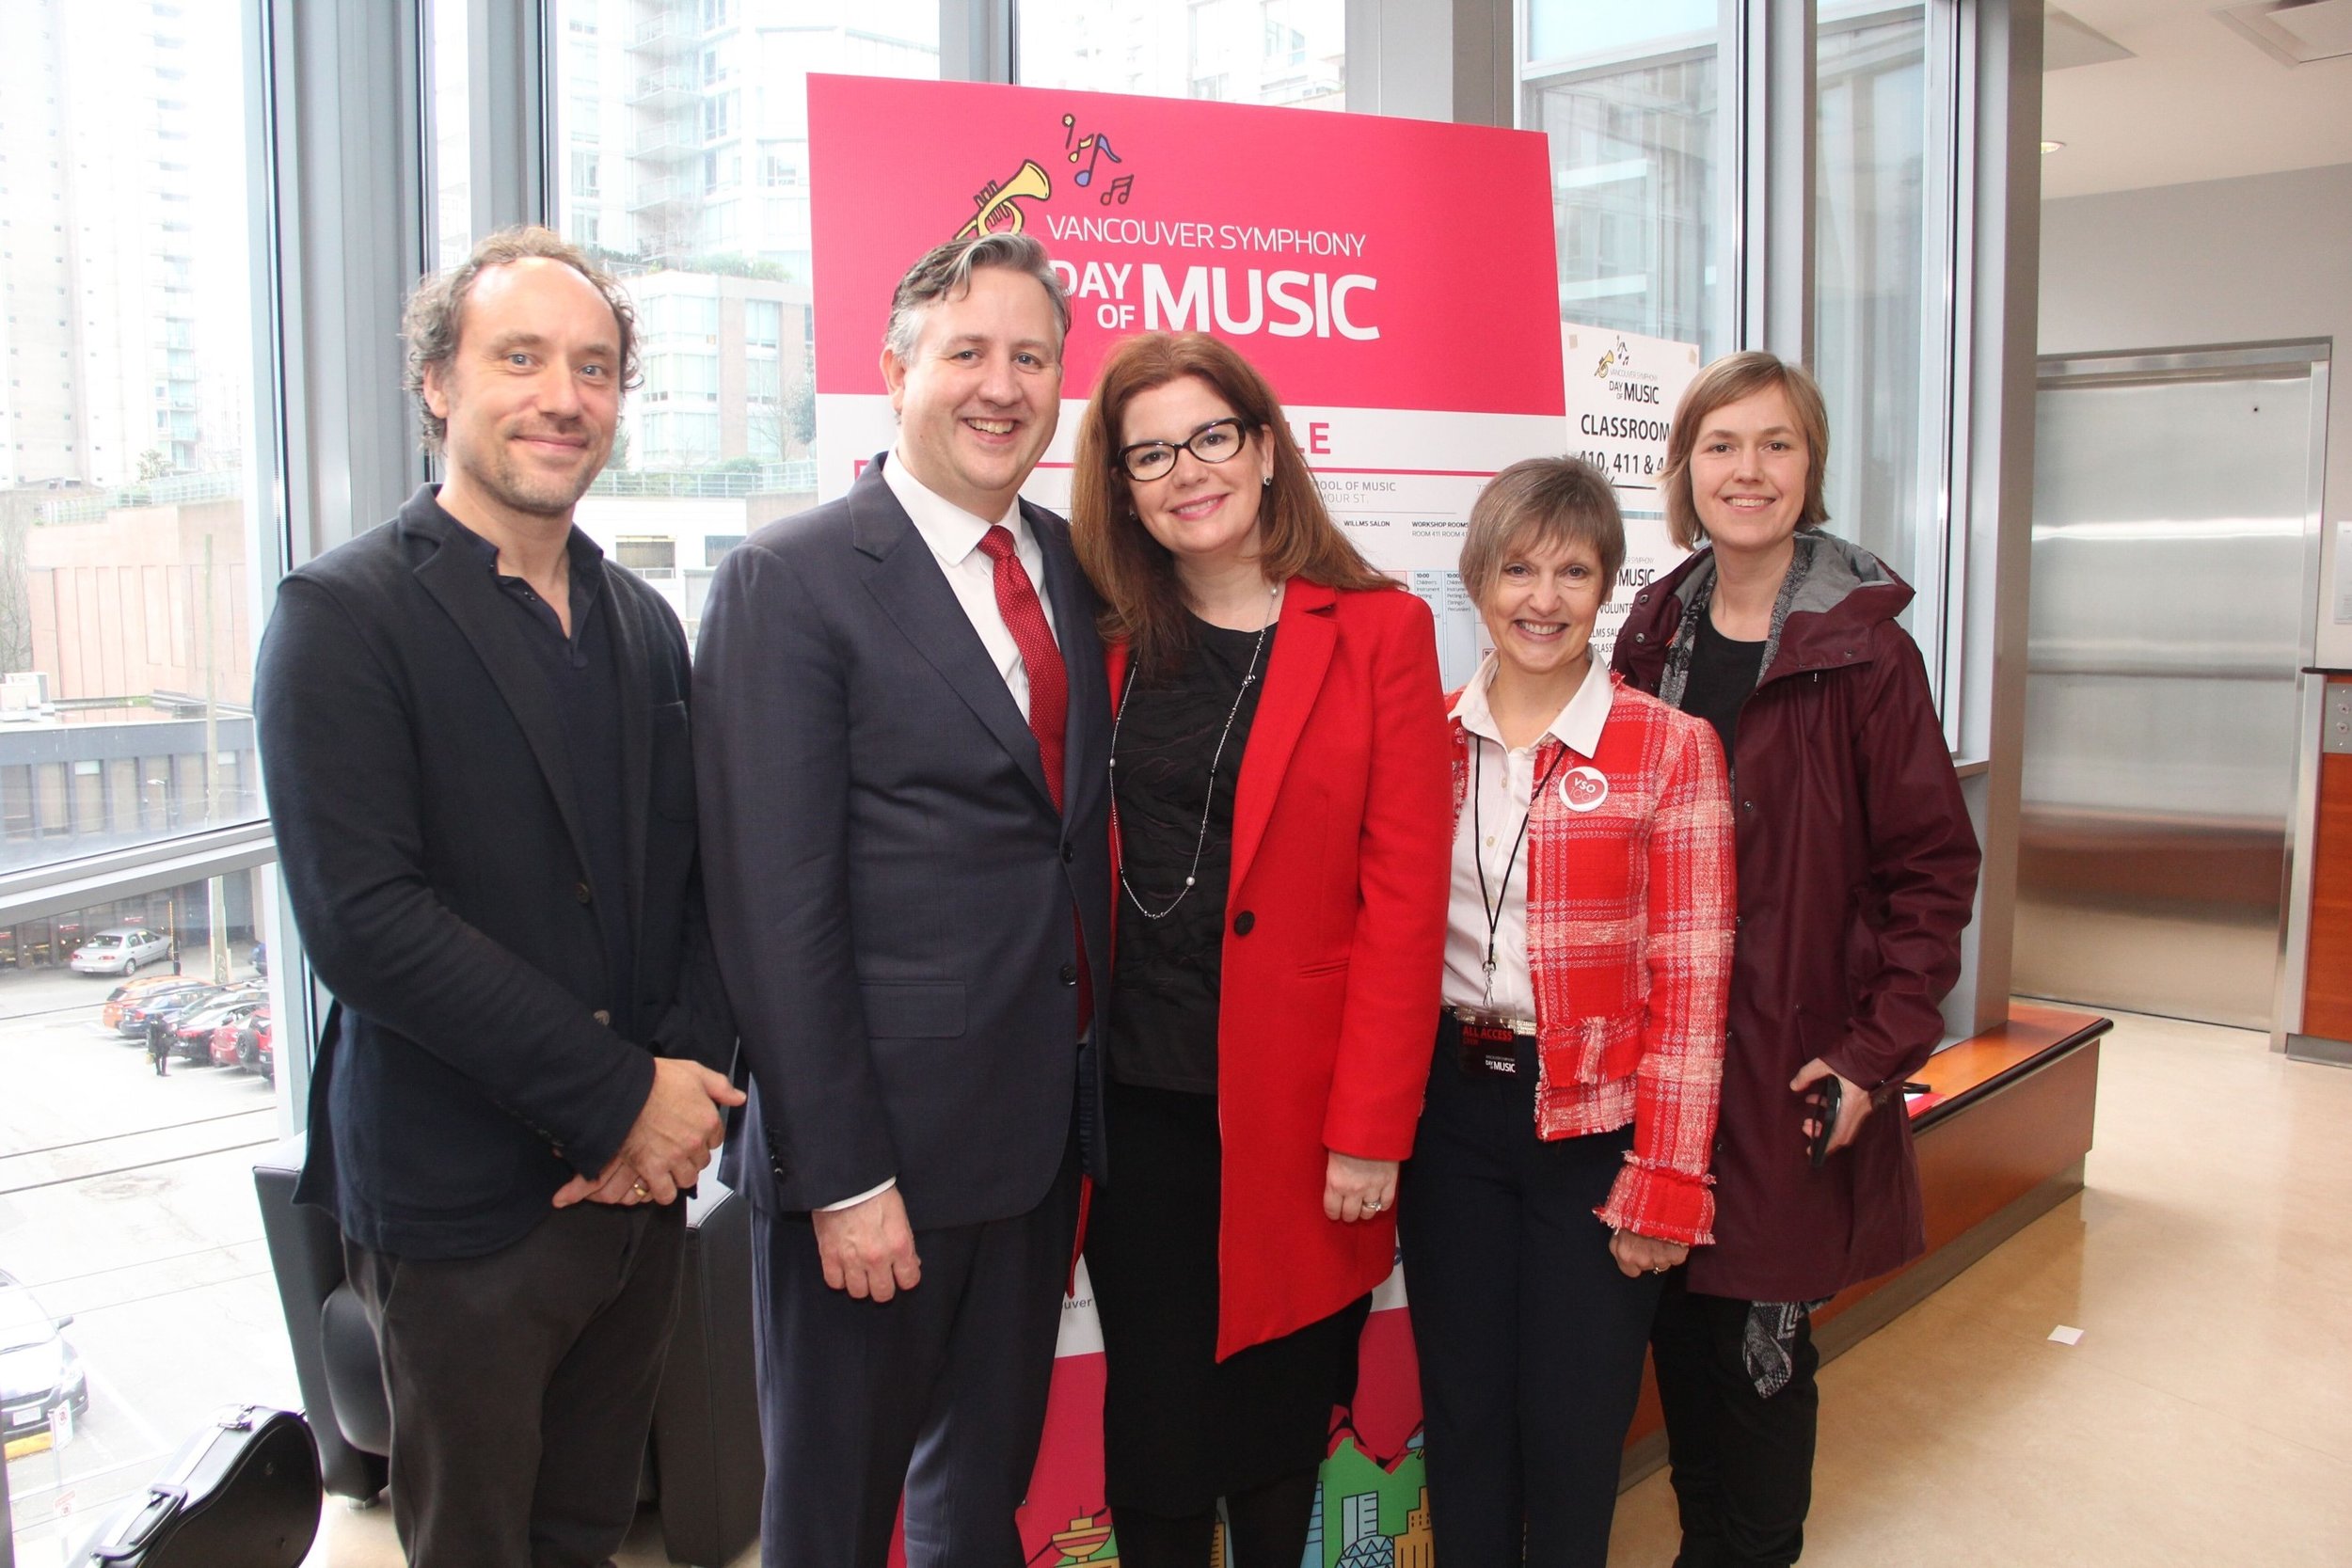  Mayor Kennedy Stewart and his wife, Dr. Jeanette Ashe and co-chief of staff, Anita Zaenker with VSO President Kelly Tweeddale and Maestro Otto Tausk. 